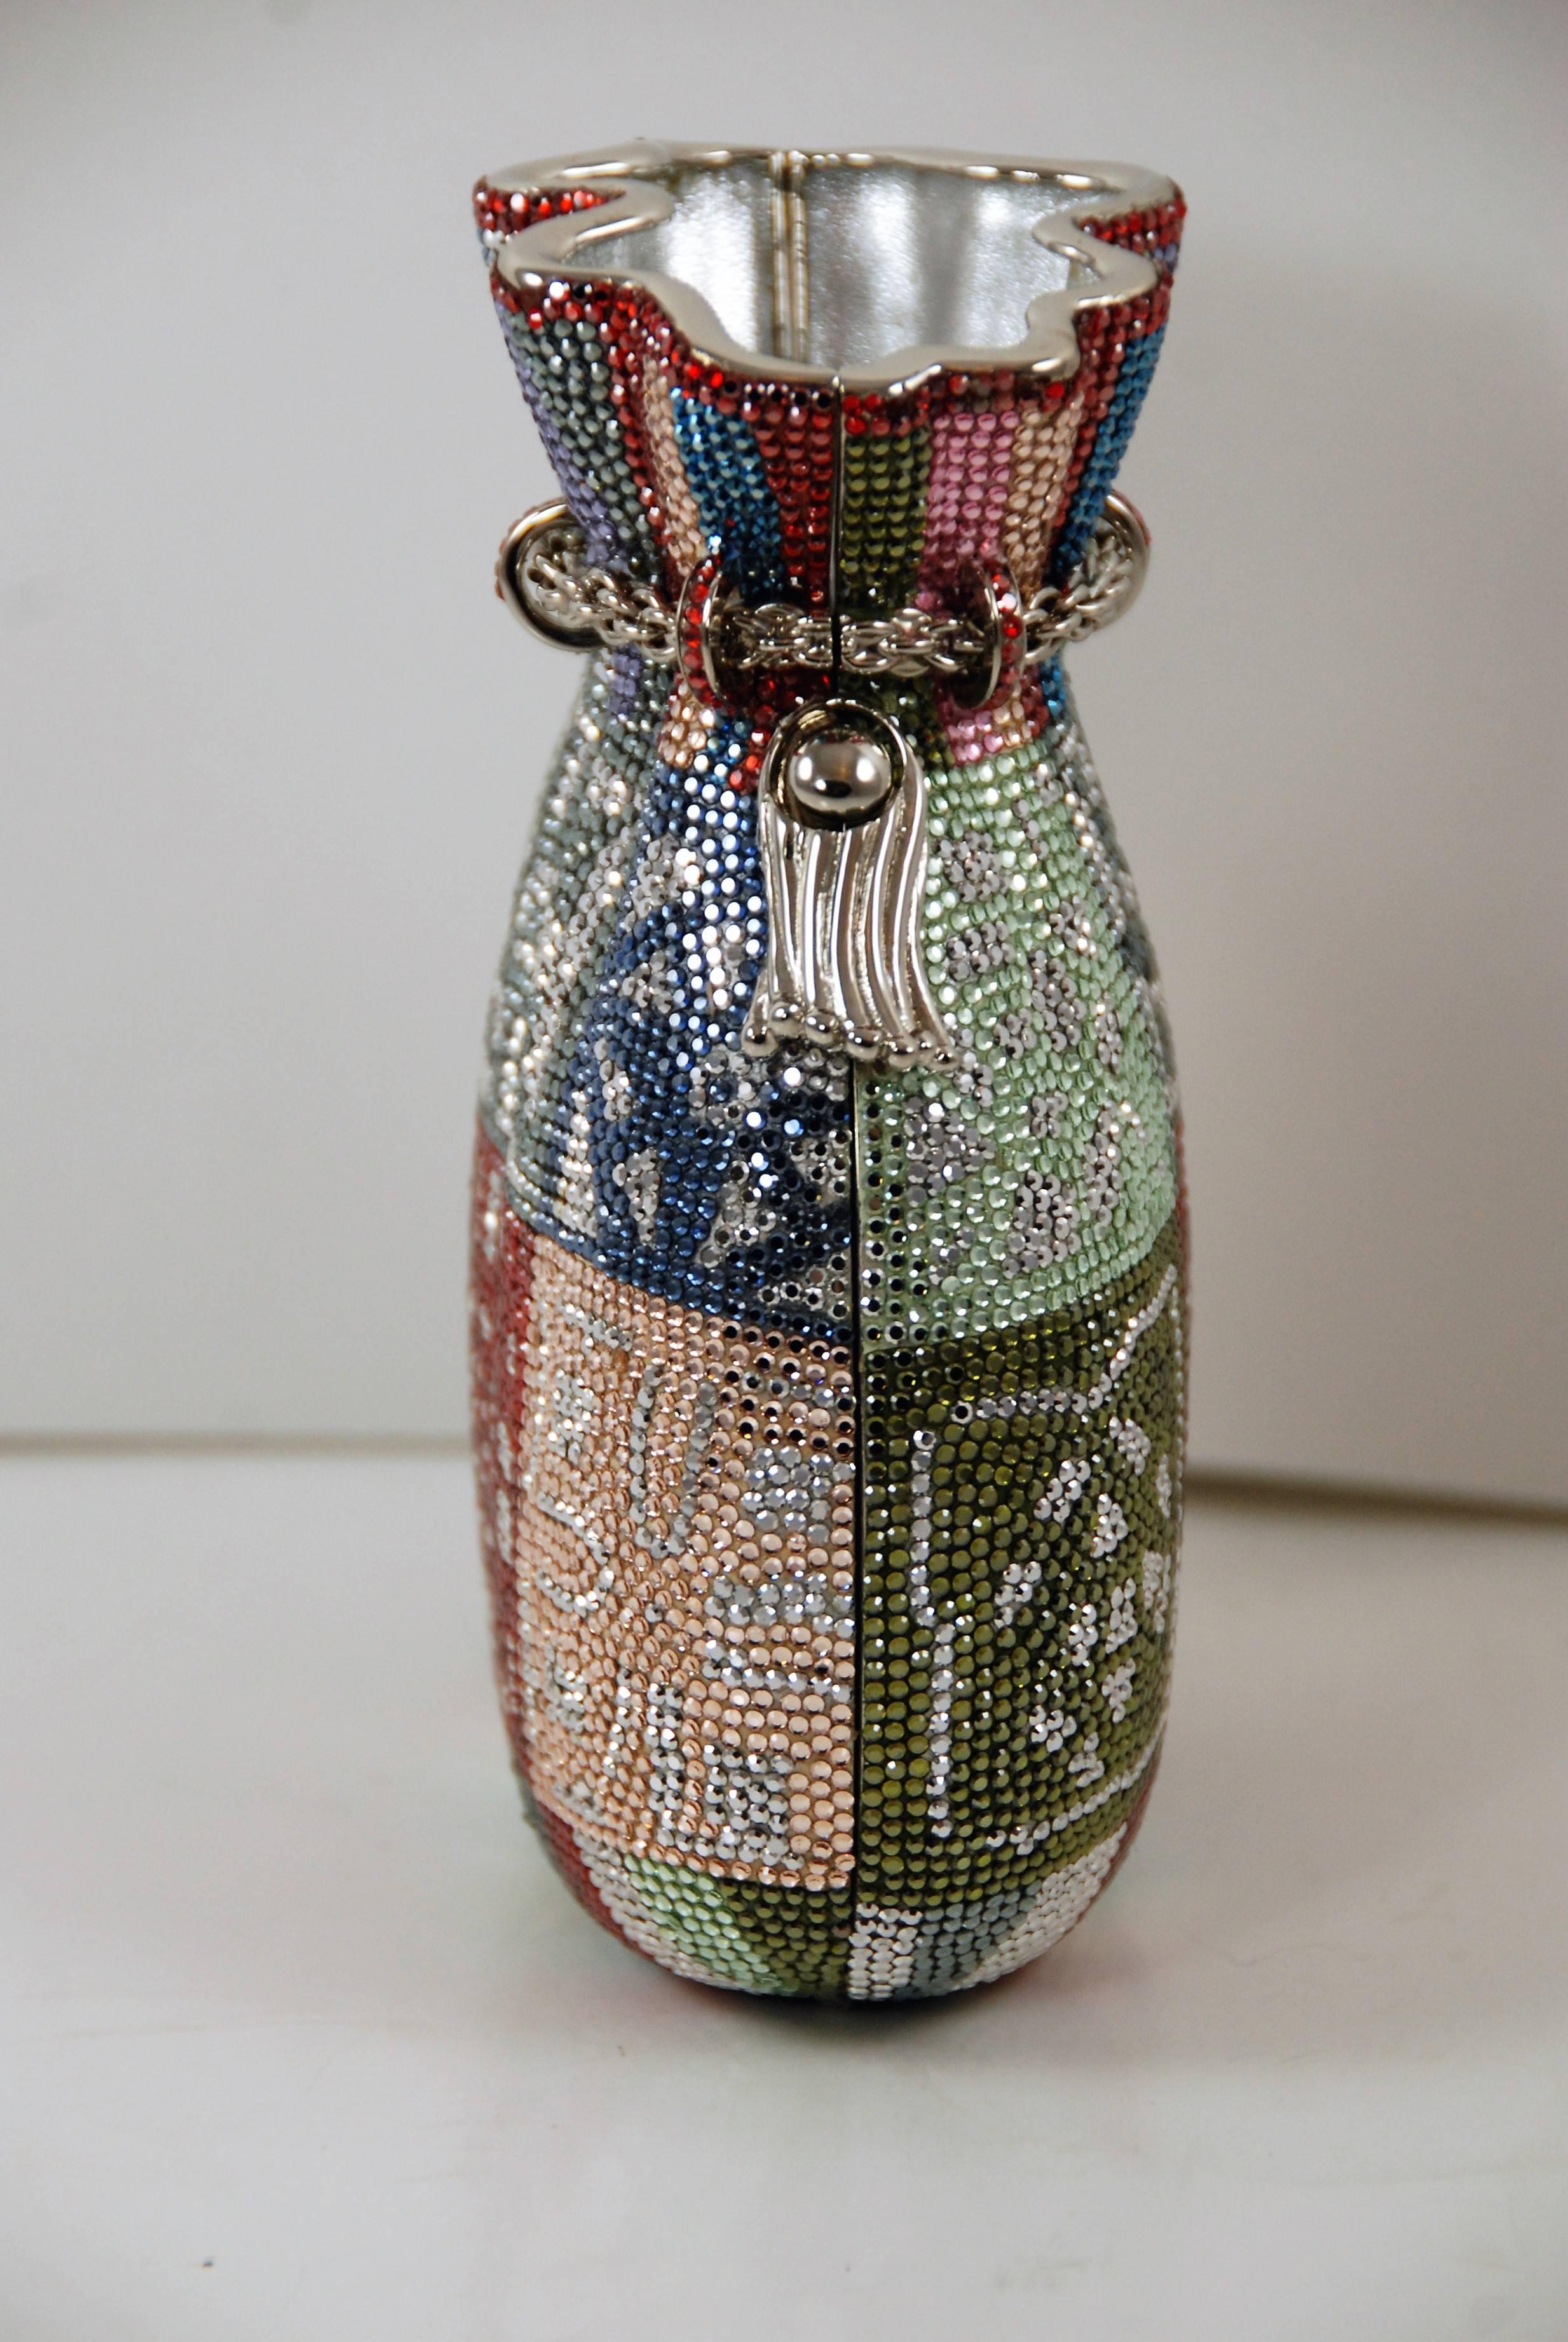 1990s Judith Leiber Full Bead Misers Purse Minaudiere In Excellent Condition For Sale In New York, NY